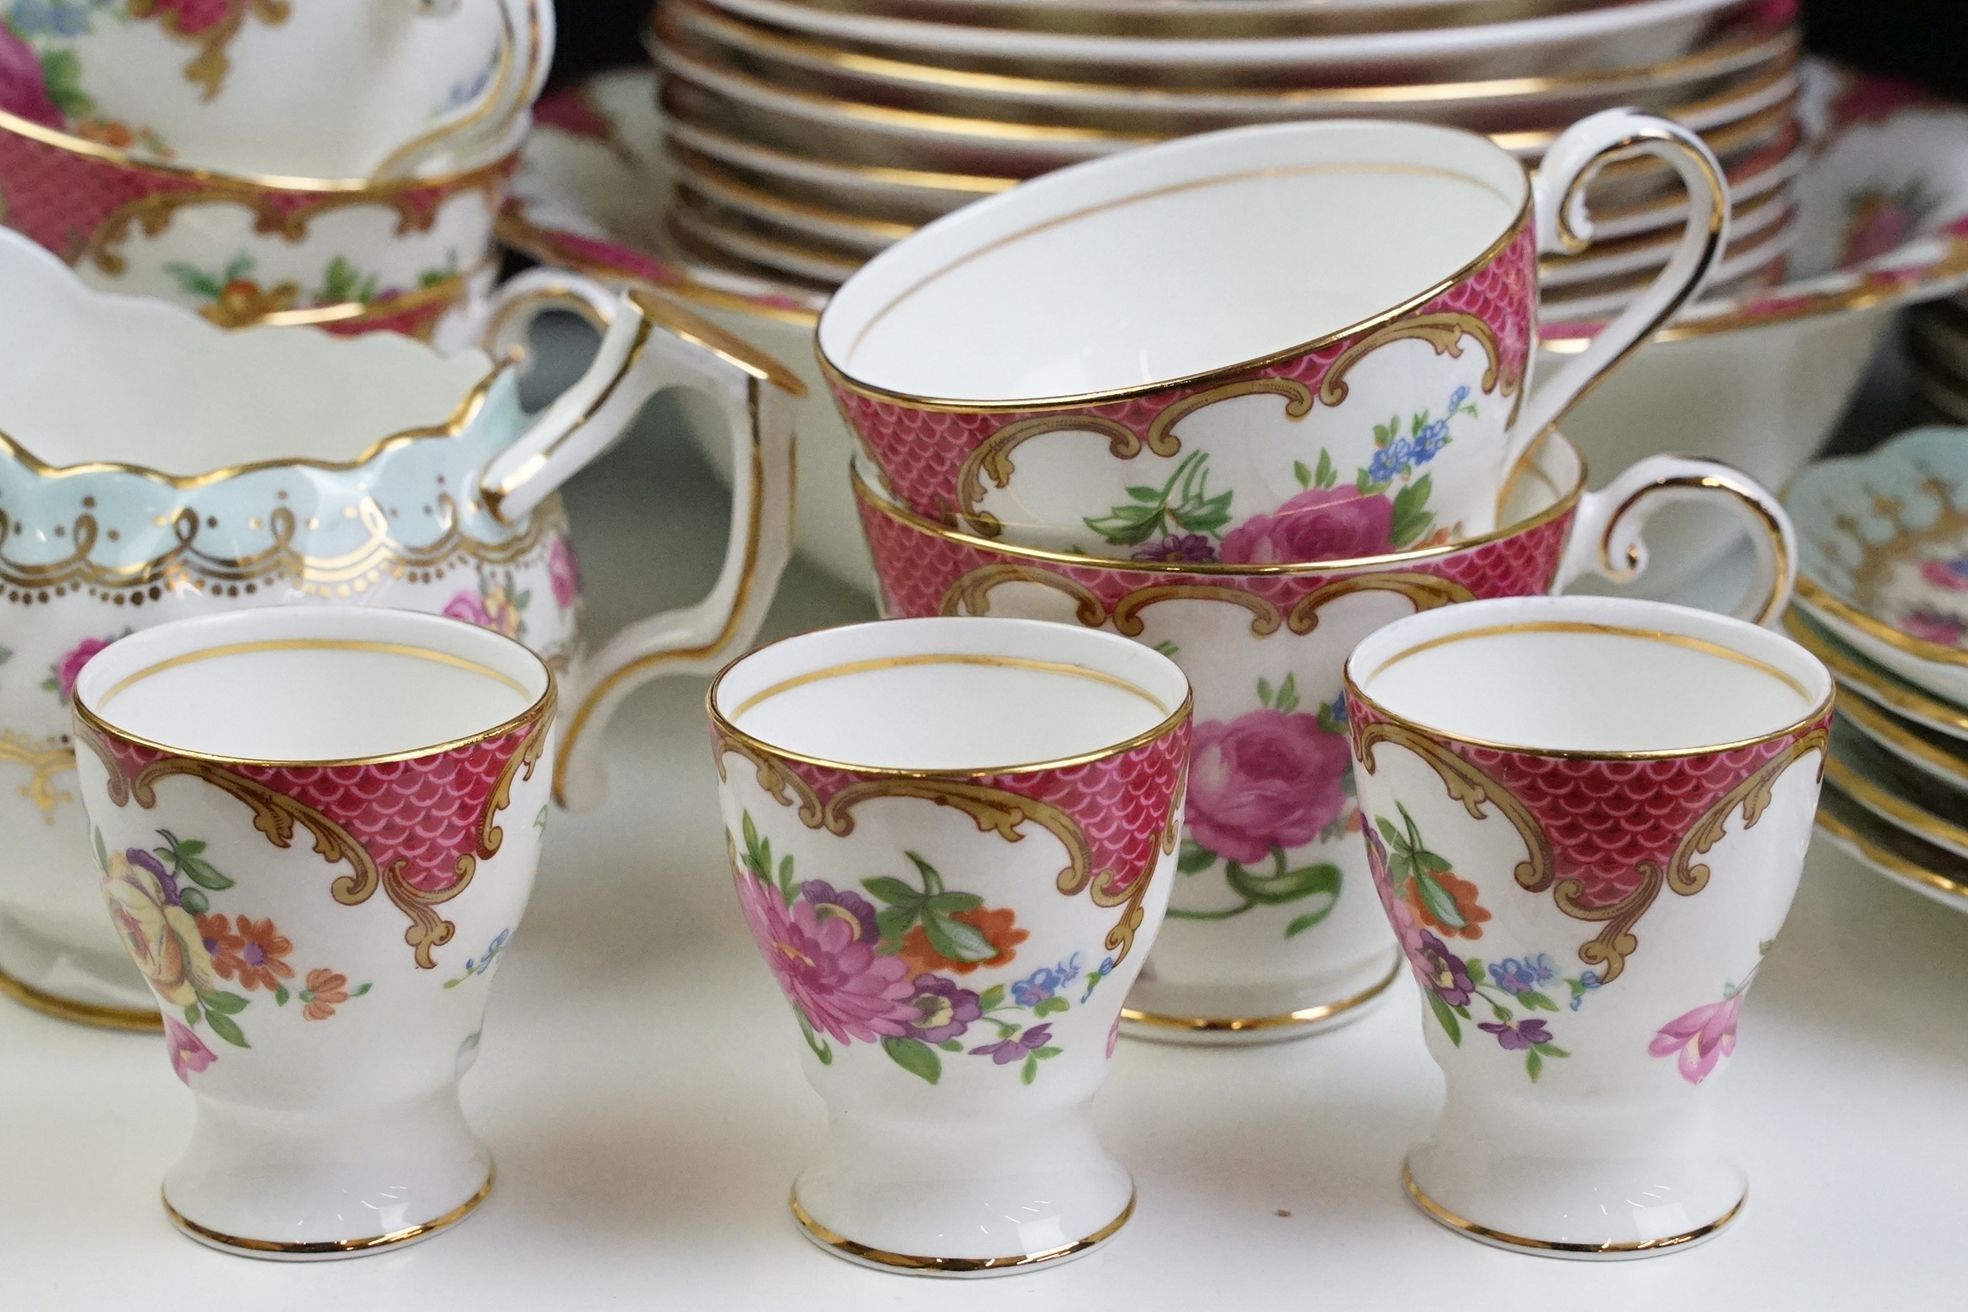 Aynsley porcelain floral tea set, pattern no. B971, to include teapot, 8 cups, 9 saucers, 7 tea - Image 4 of 9